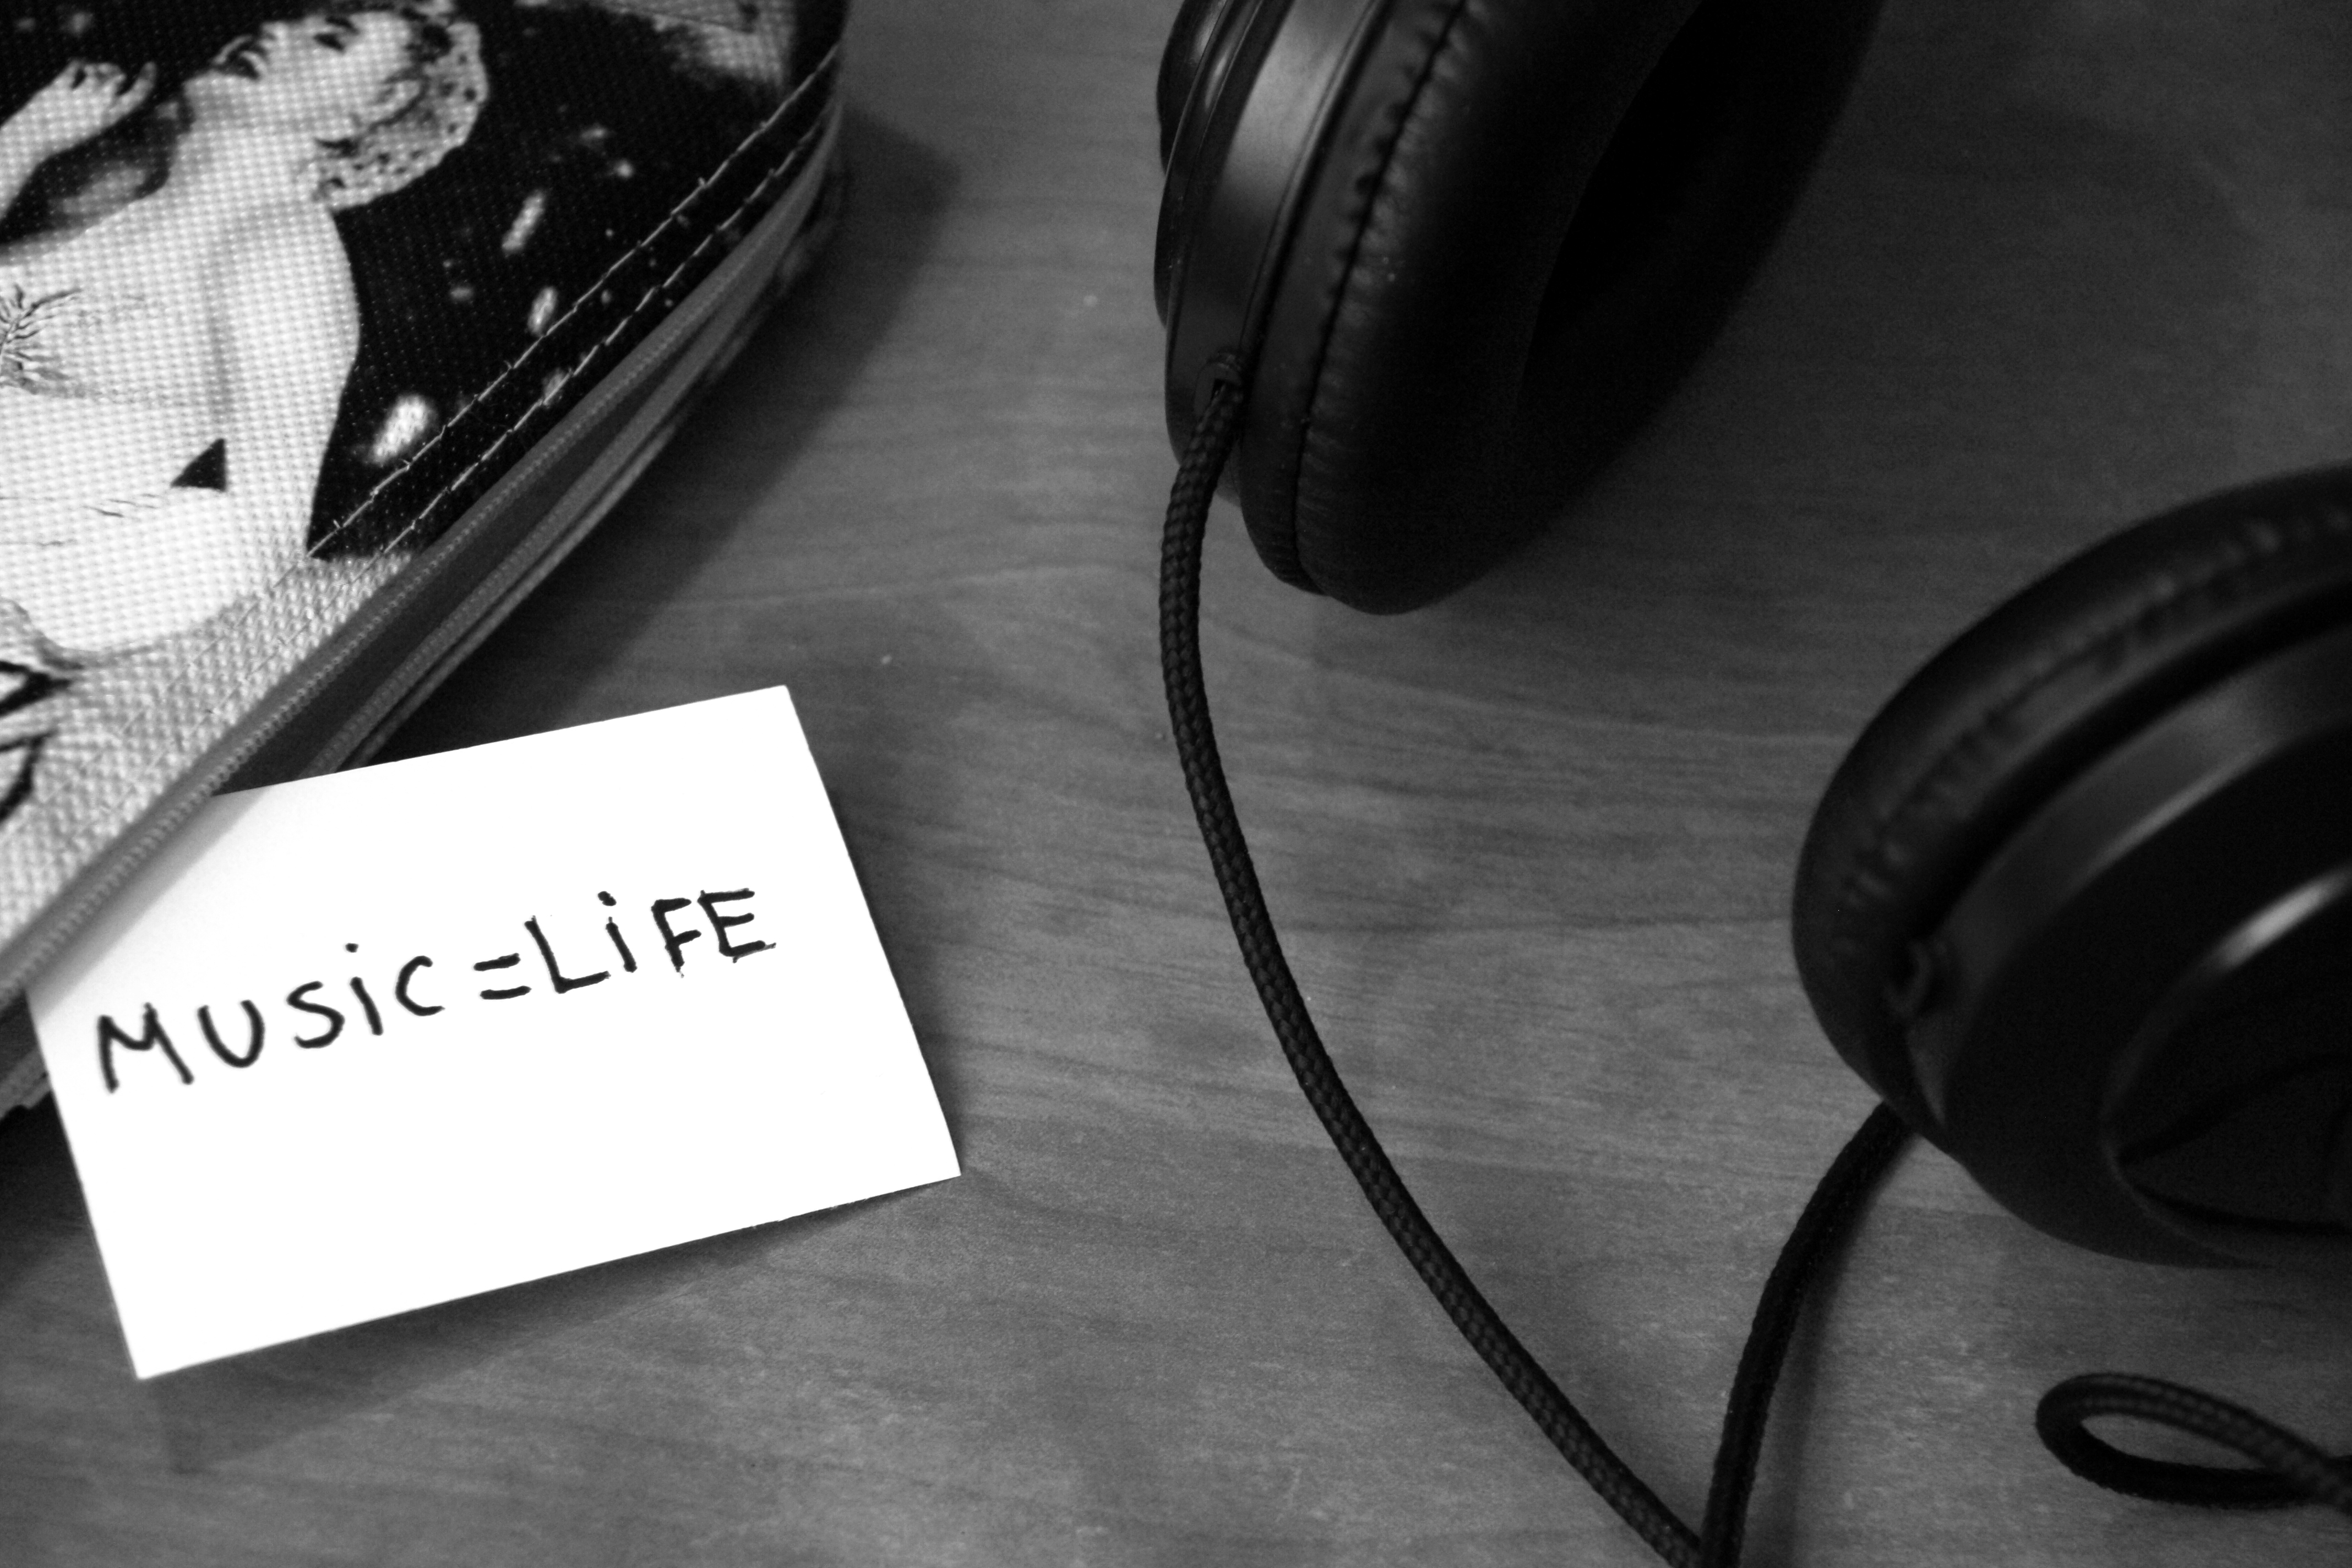 Grayscale Photo of Printer Paper With Printed Music = Life Near Headphones · Free